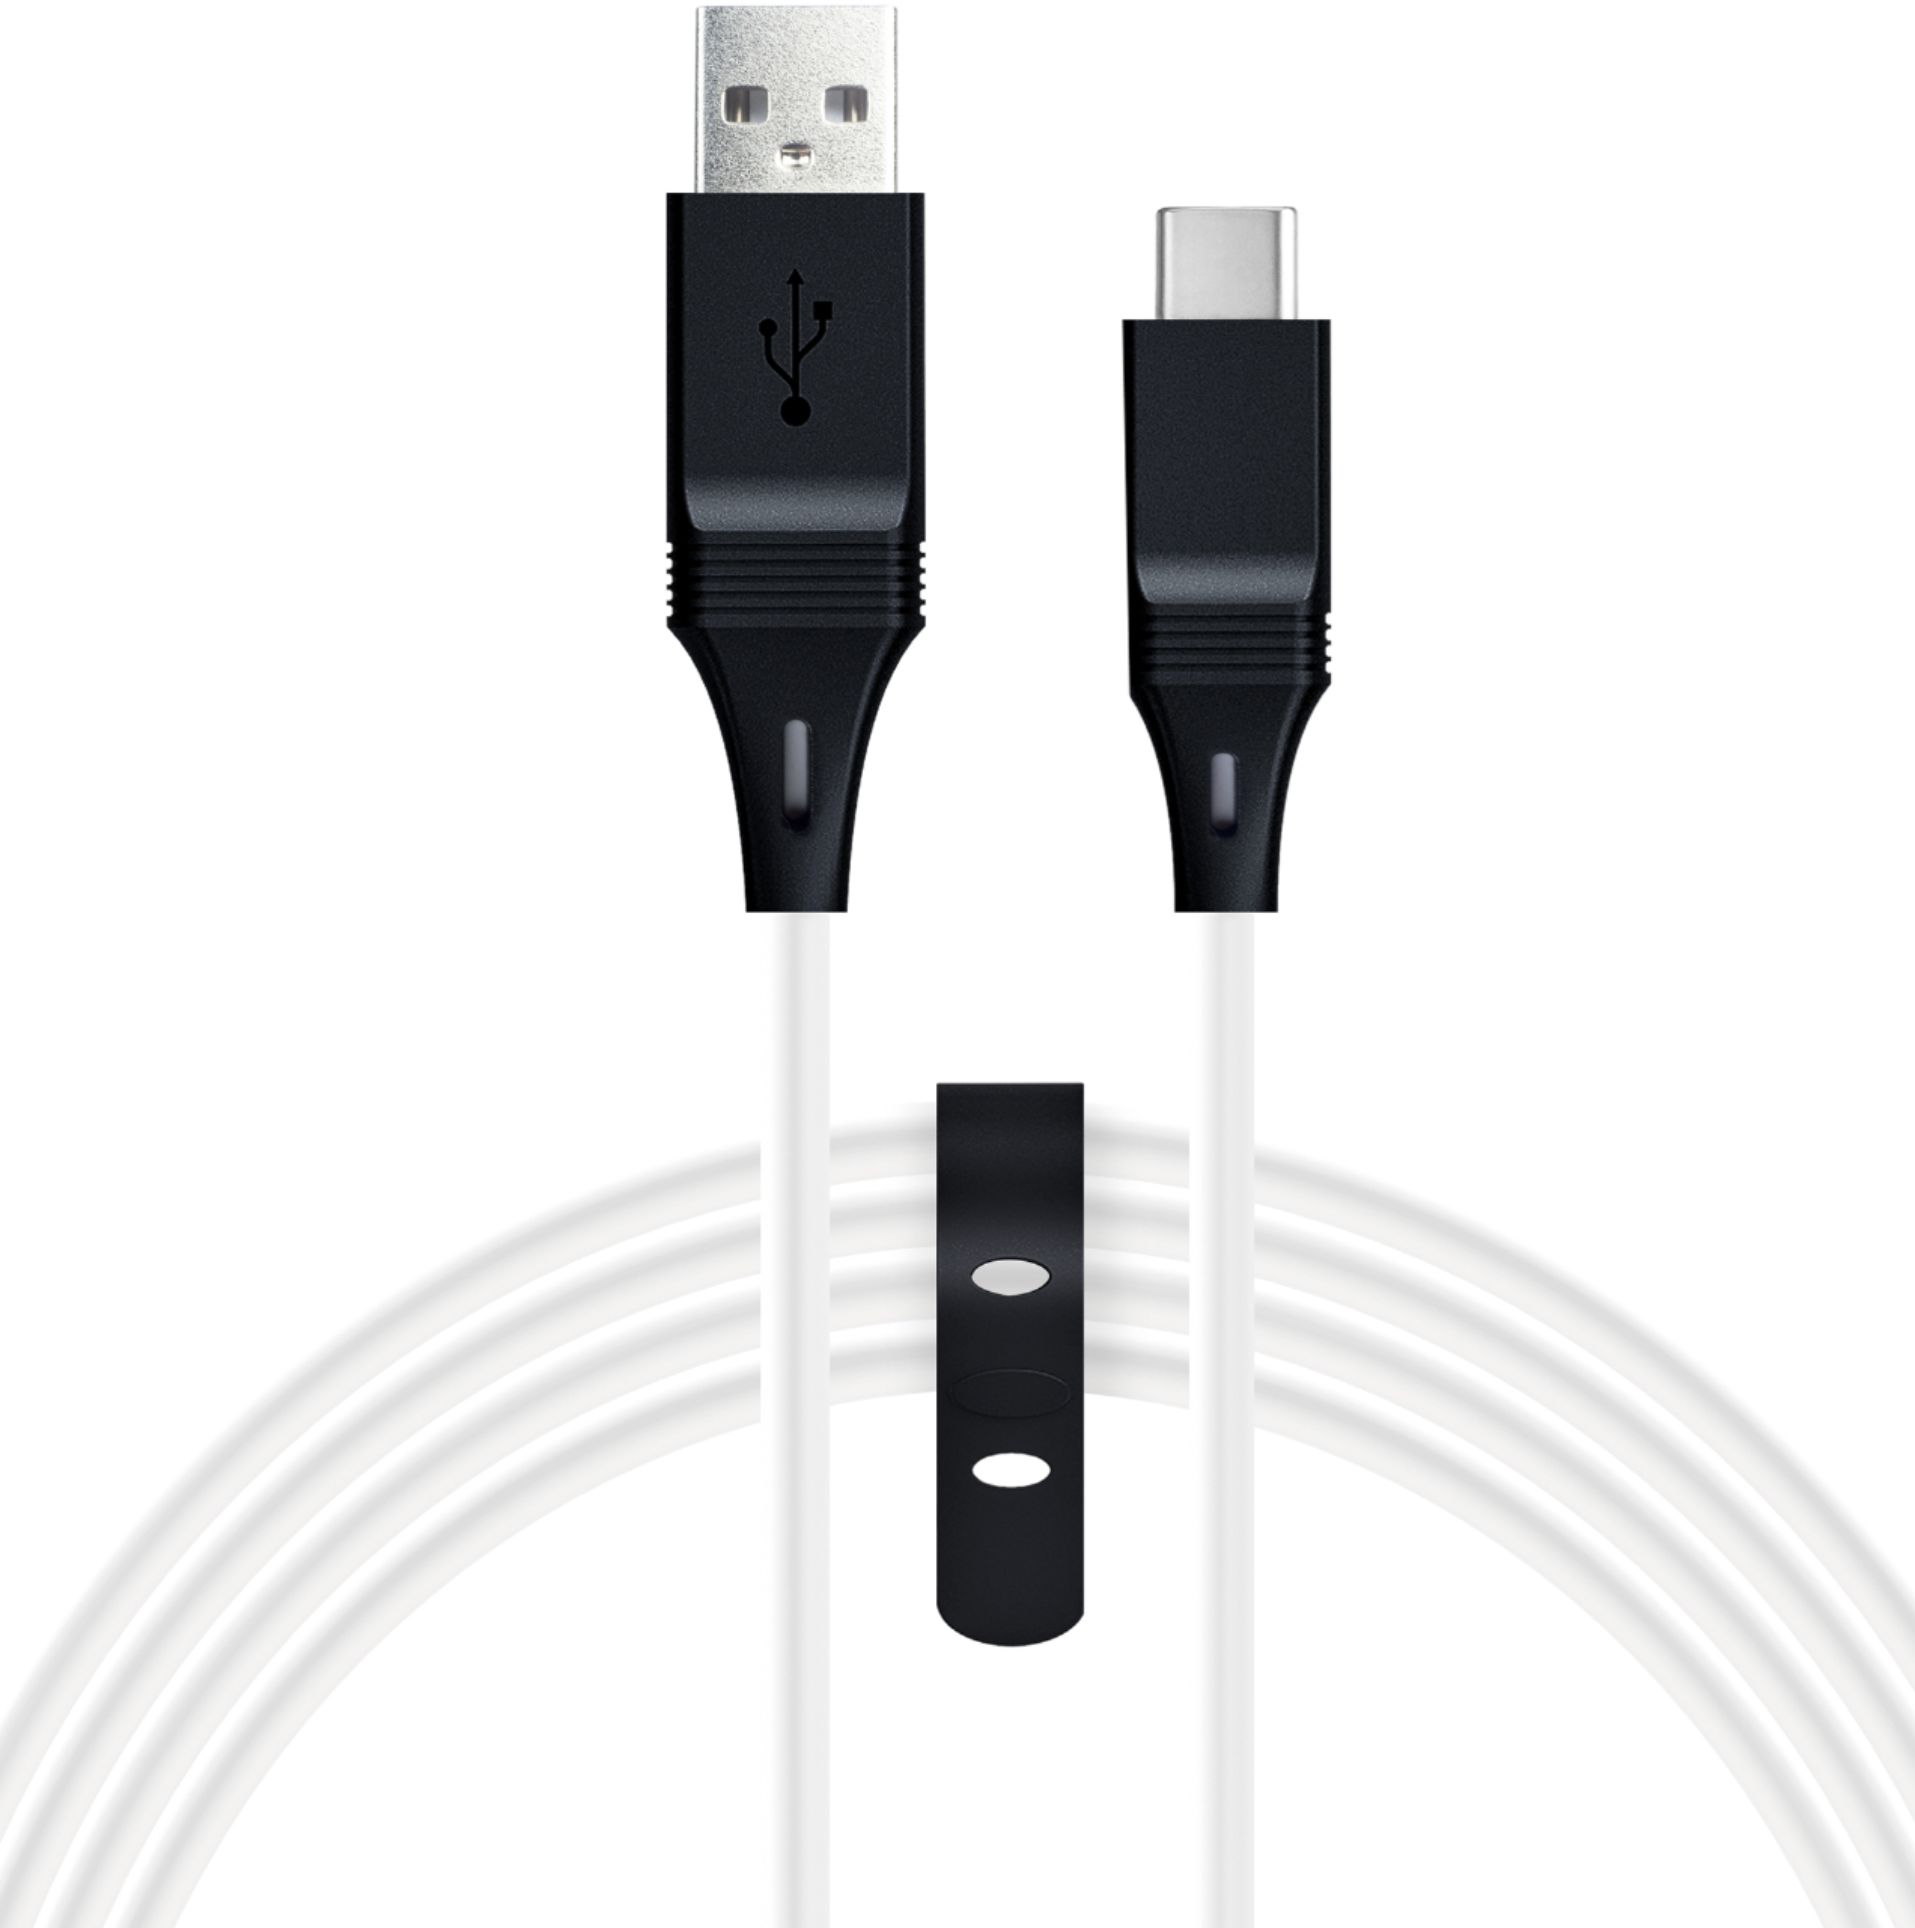 USB-C Cable for PlayStation 5, PlayStation USB & HDMI cables for  Playstation 4 & 5